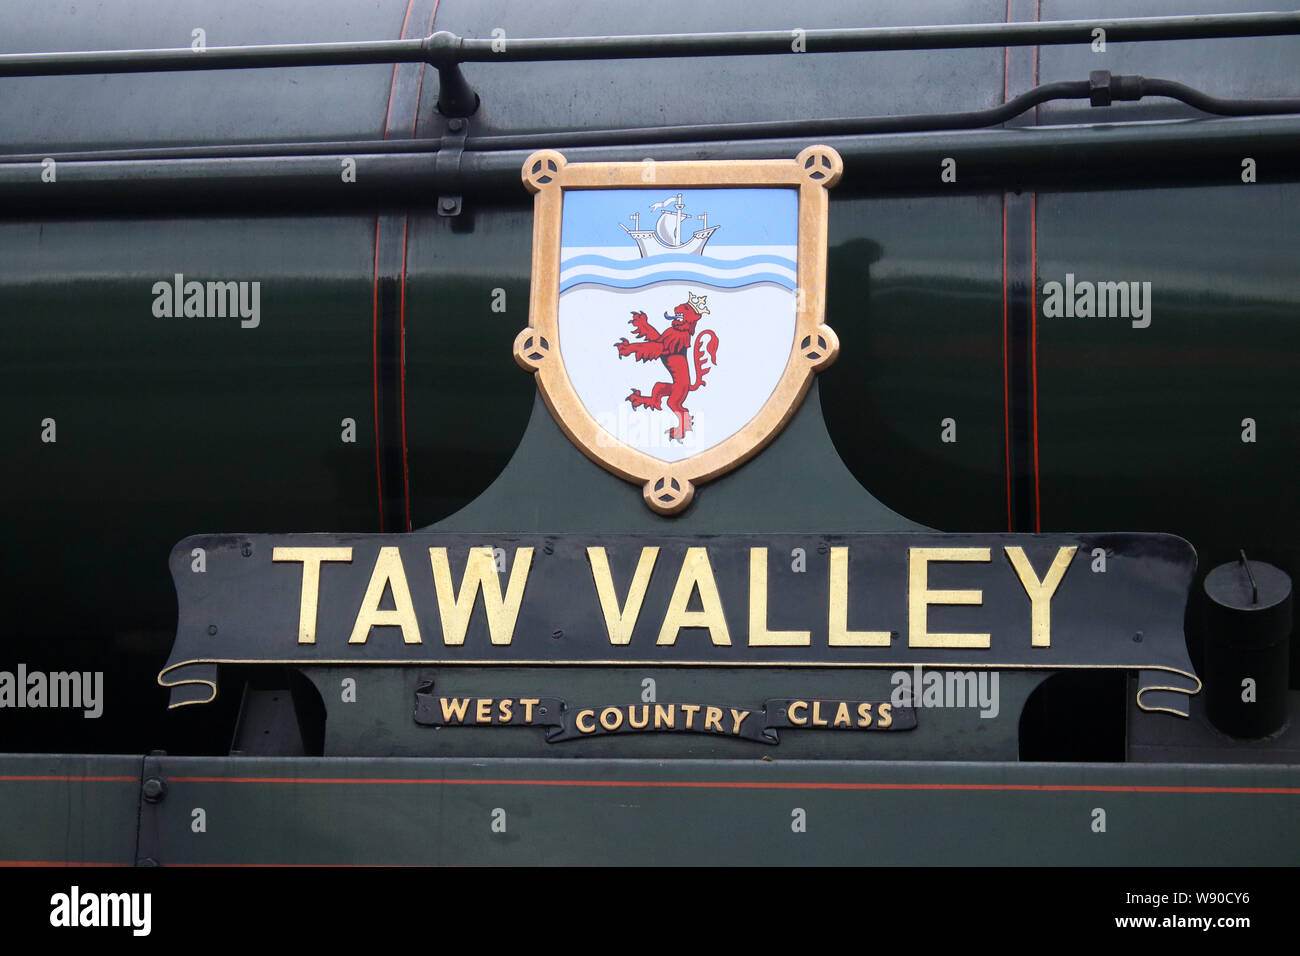 Name plate on preserved steam locomotive 34027 Taw Valley, a Southern Region West Country Class 4-6-2 pacific on Severn Valley Heritage Railway. Stock Photo